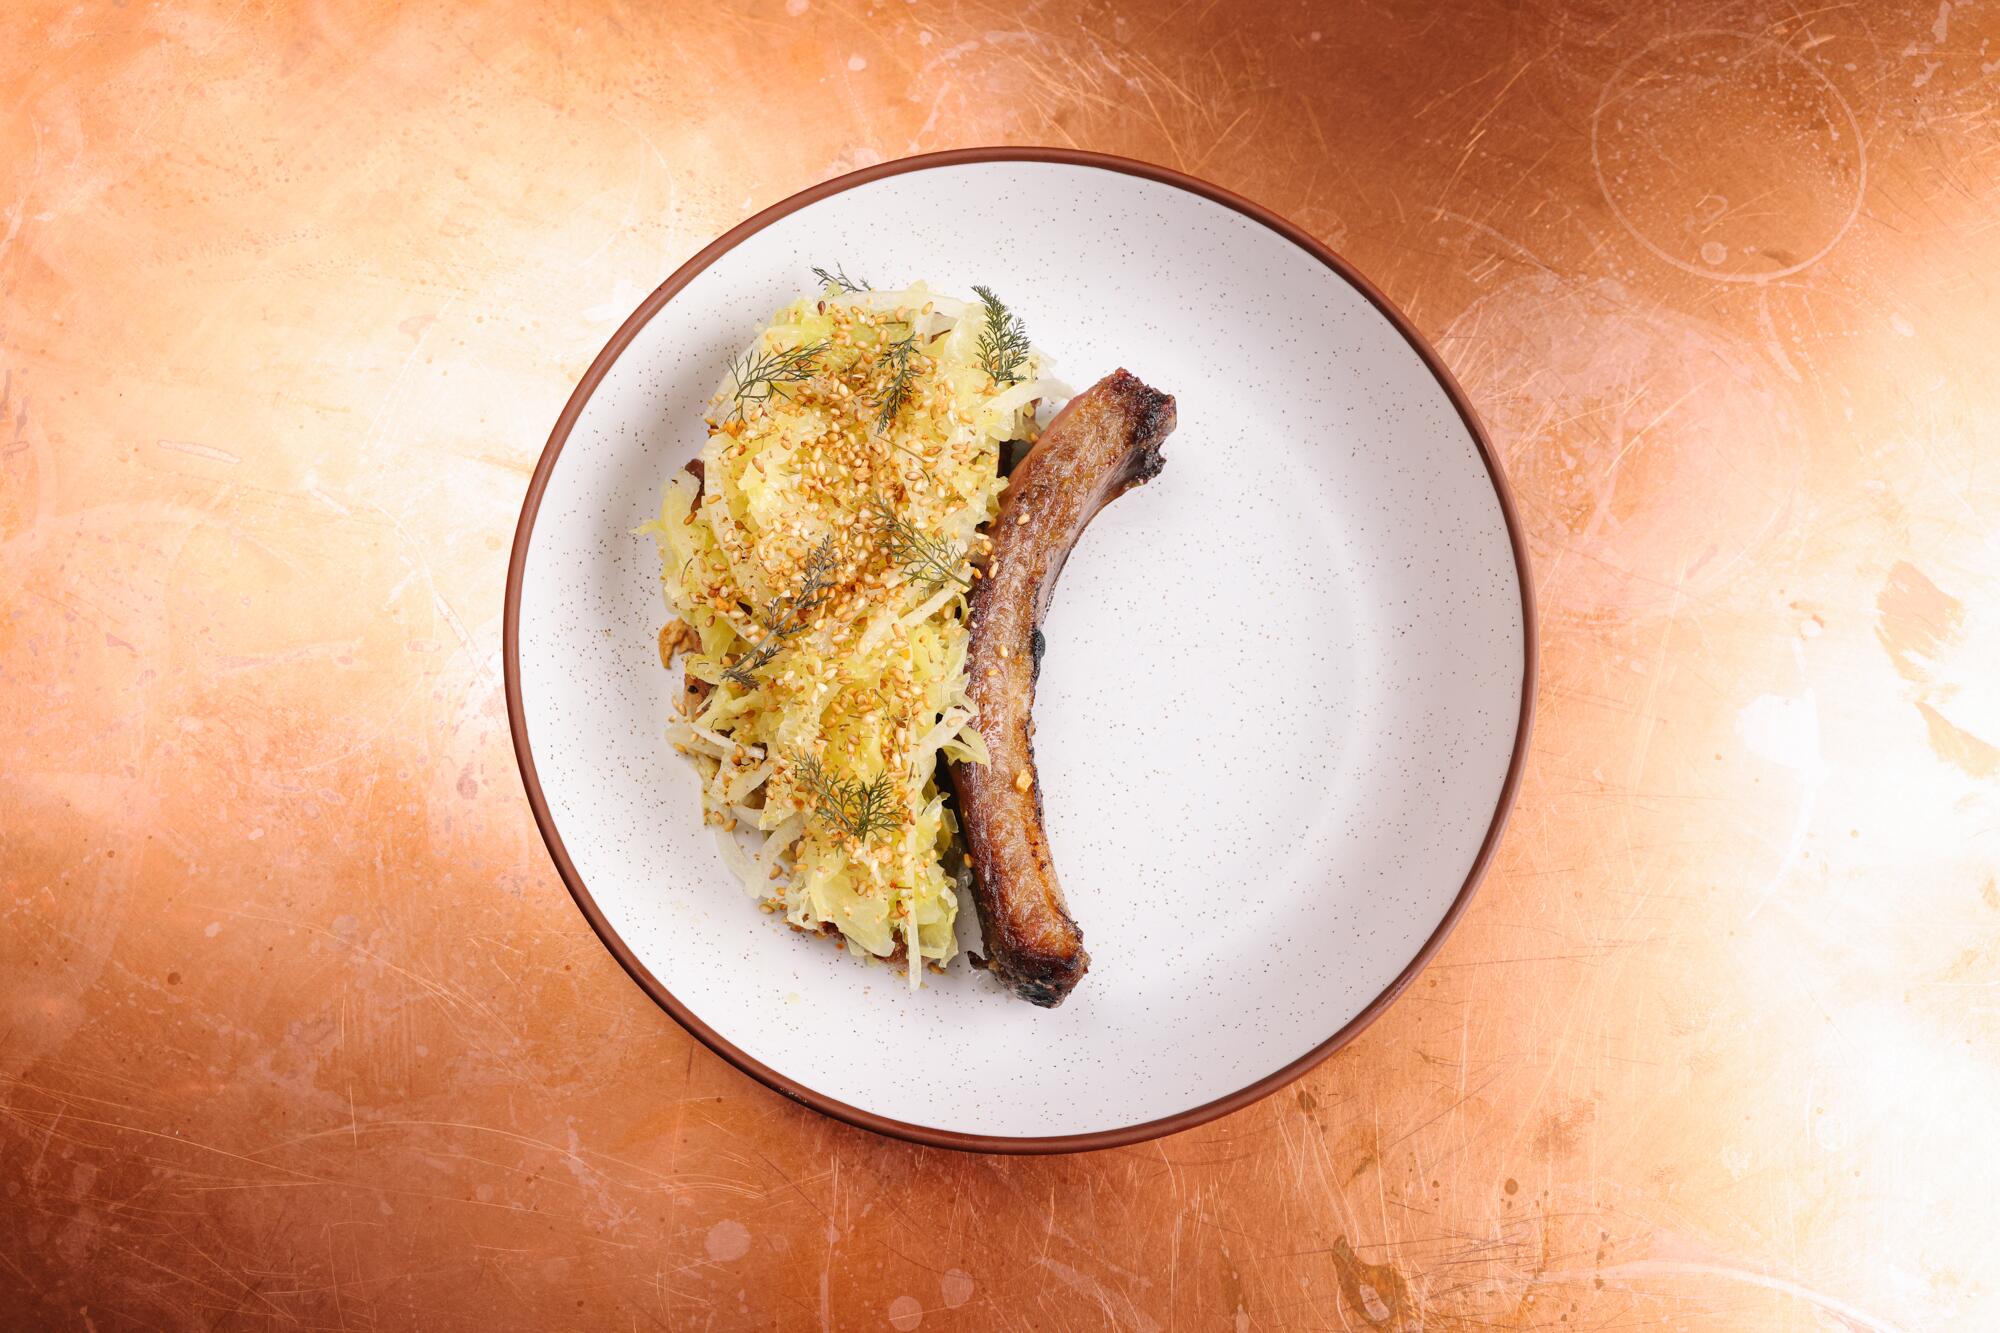 The Iberico Pork Chop dish with cabbage and fennel pollen furikake is seen at Bar Chelou.